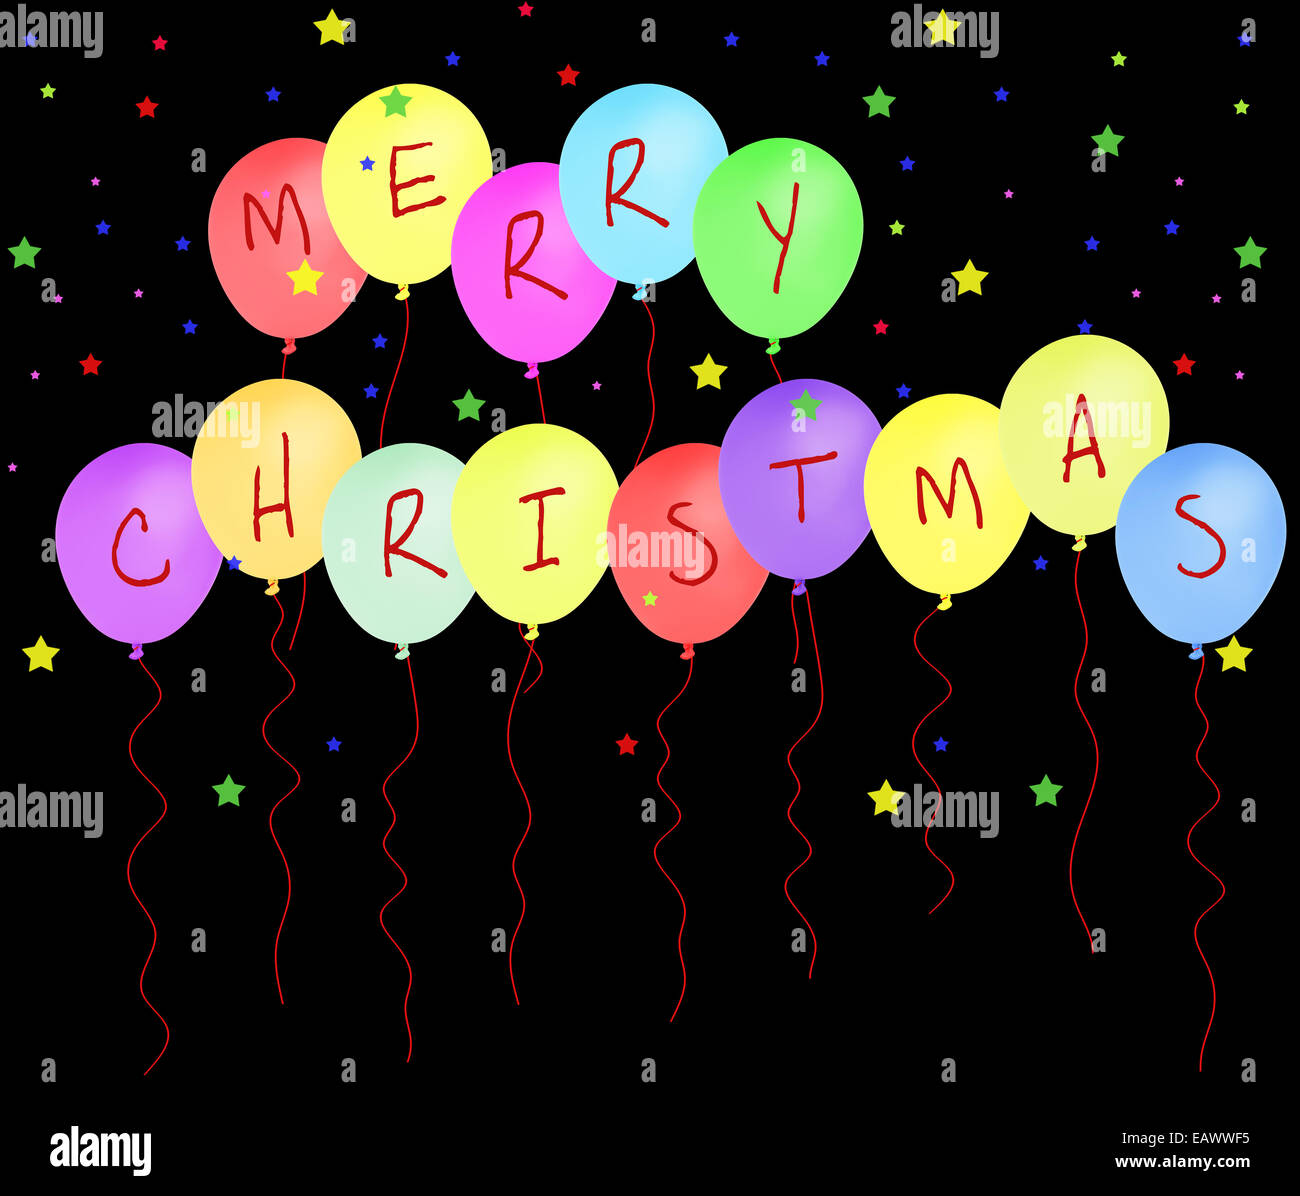 Merry Christmas background - party balloons and stars Stock Photo